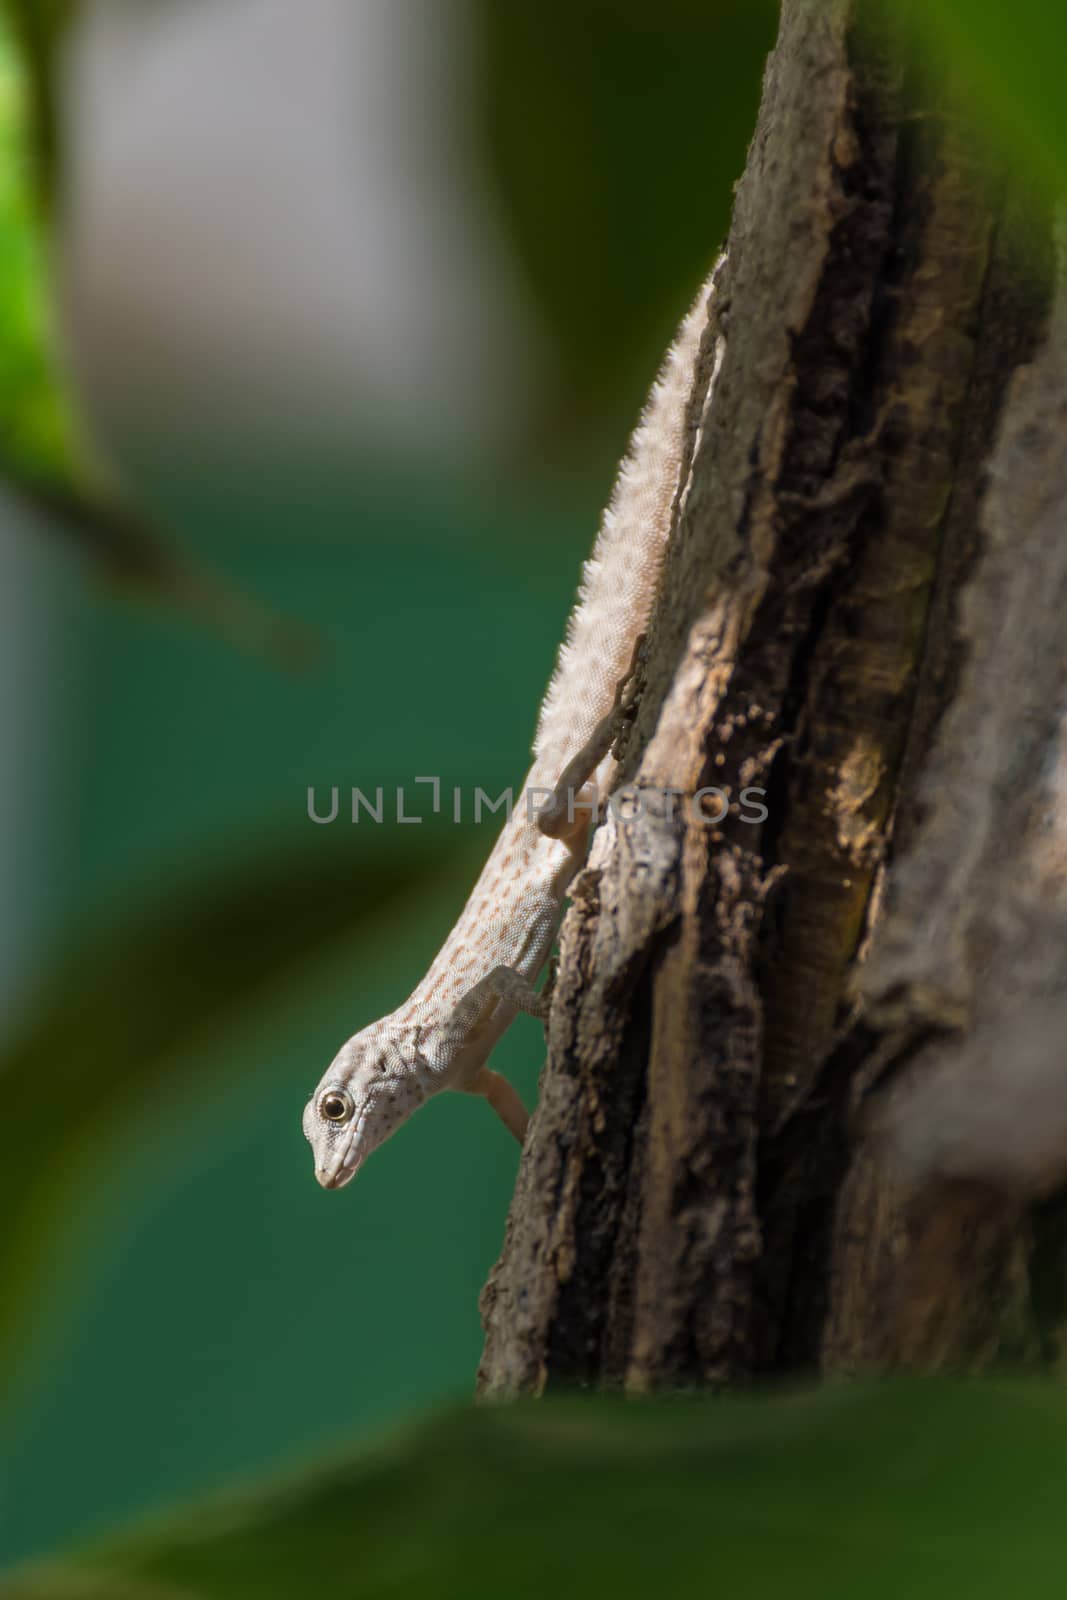 A Rock Semaphore Gecko (Pristurus rupestris) on a tree in the gl by kingmaphotos